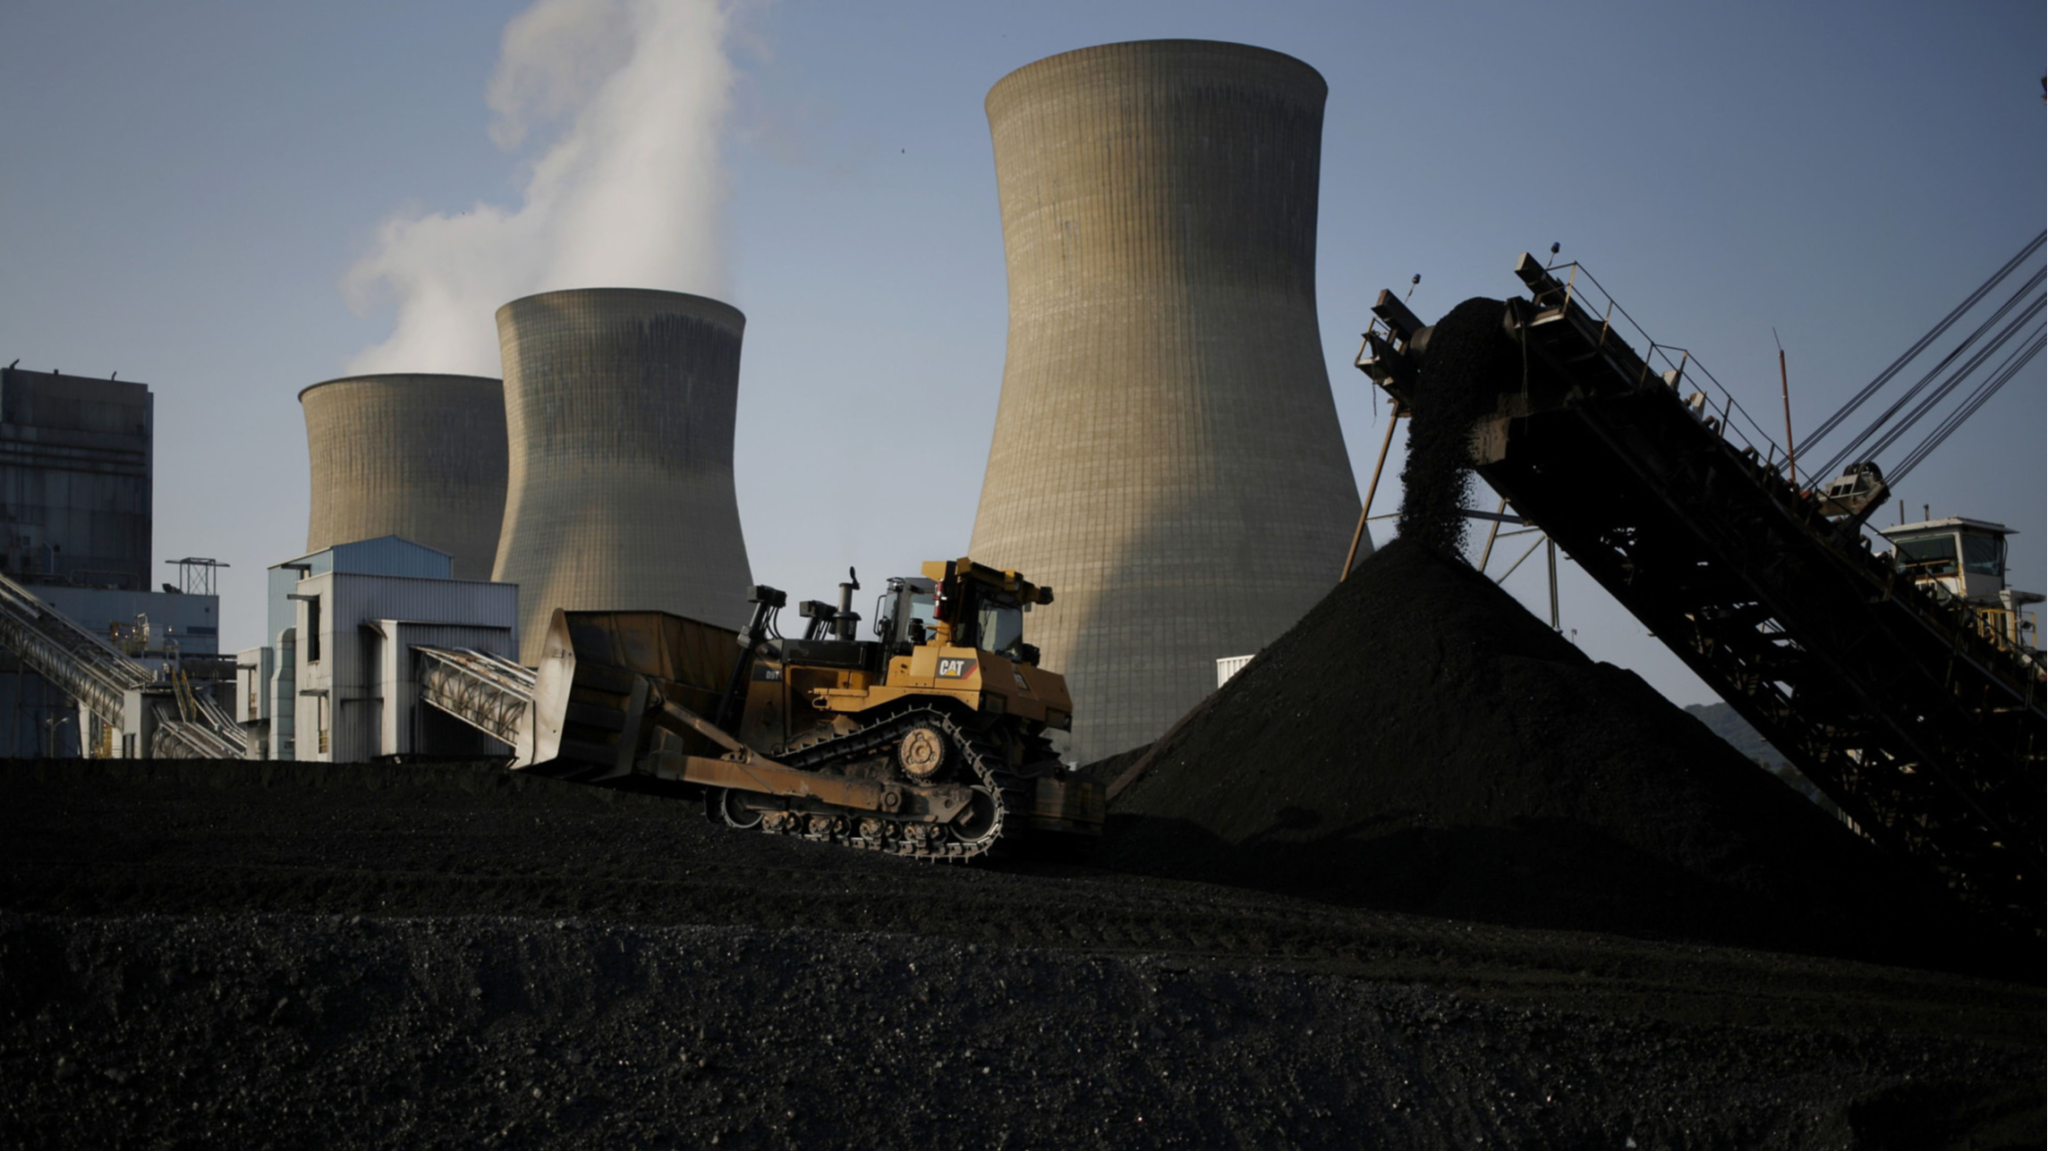 Live news: Energy crisis sends US coal price above $200 for first time